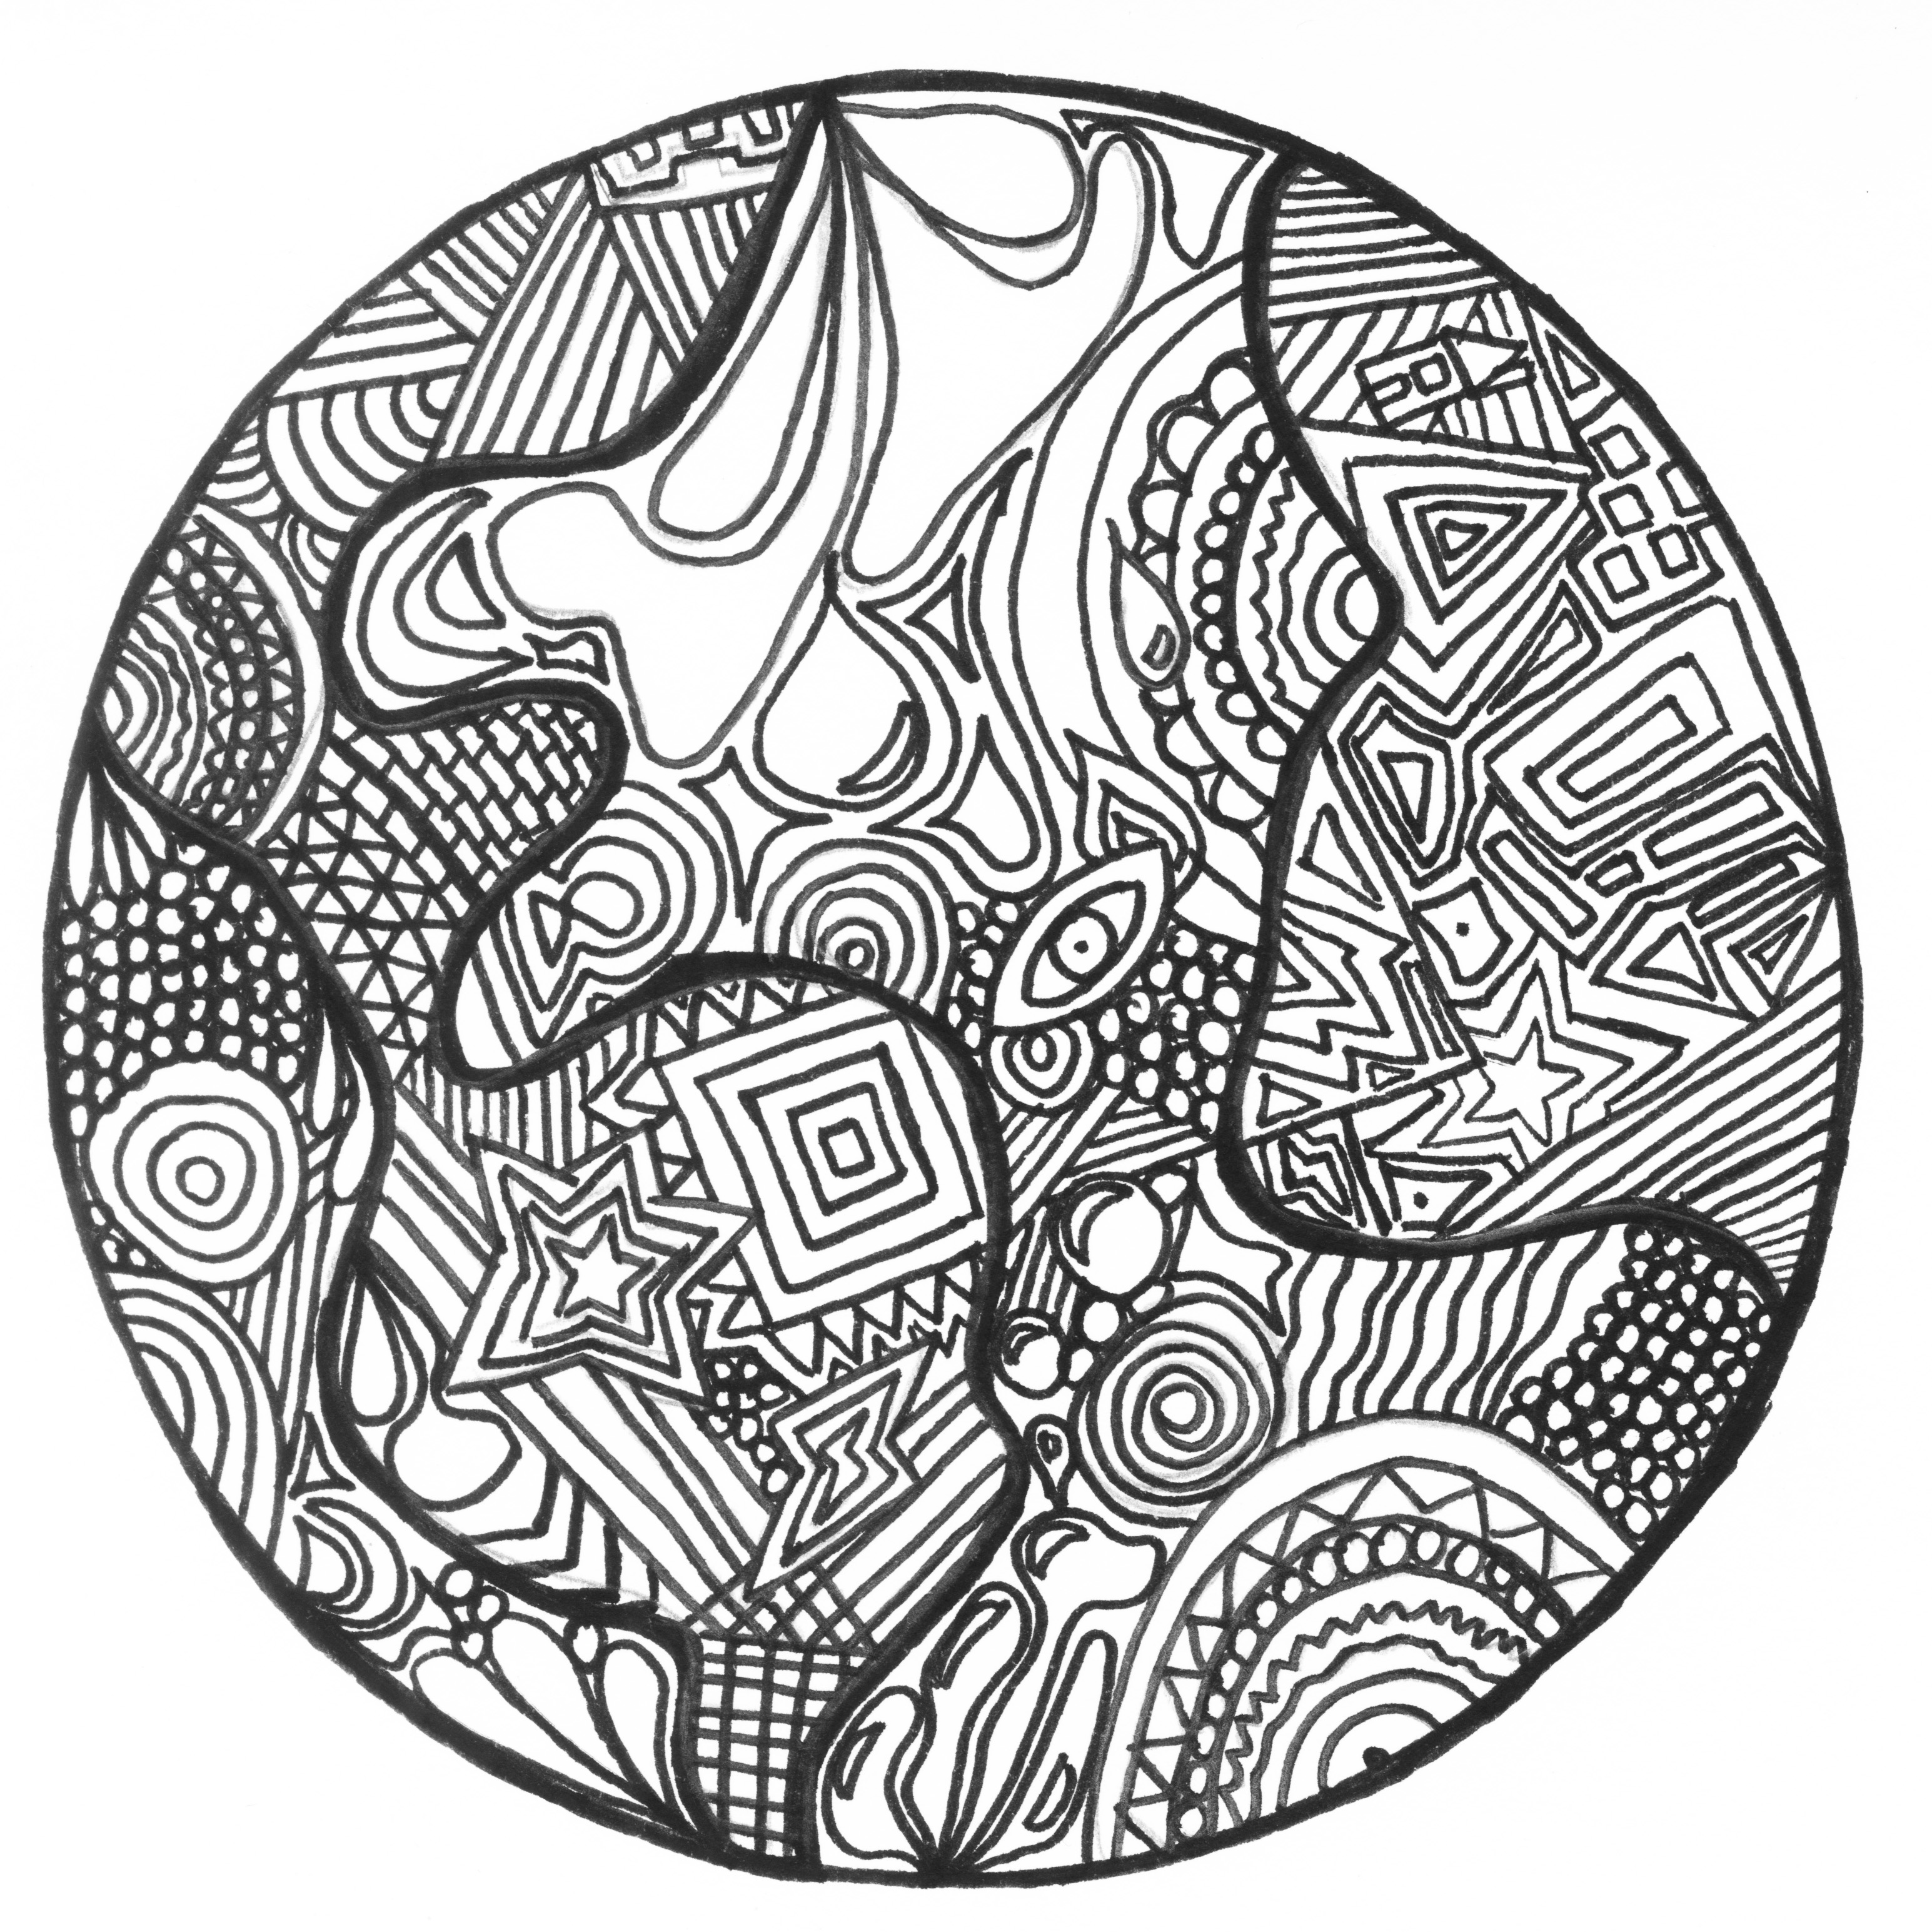 Zentangle earth - Zentangle Adult Coloring Pages